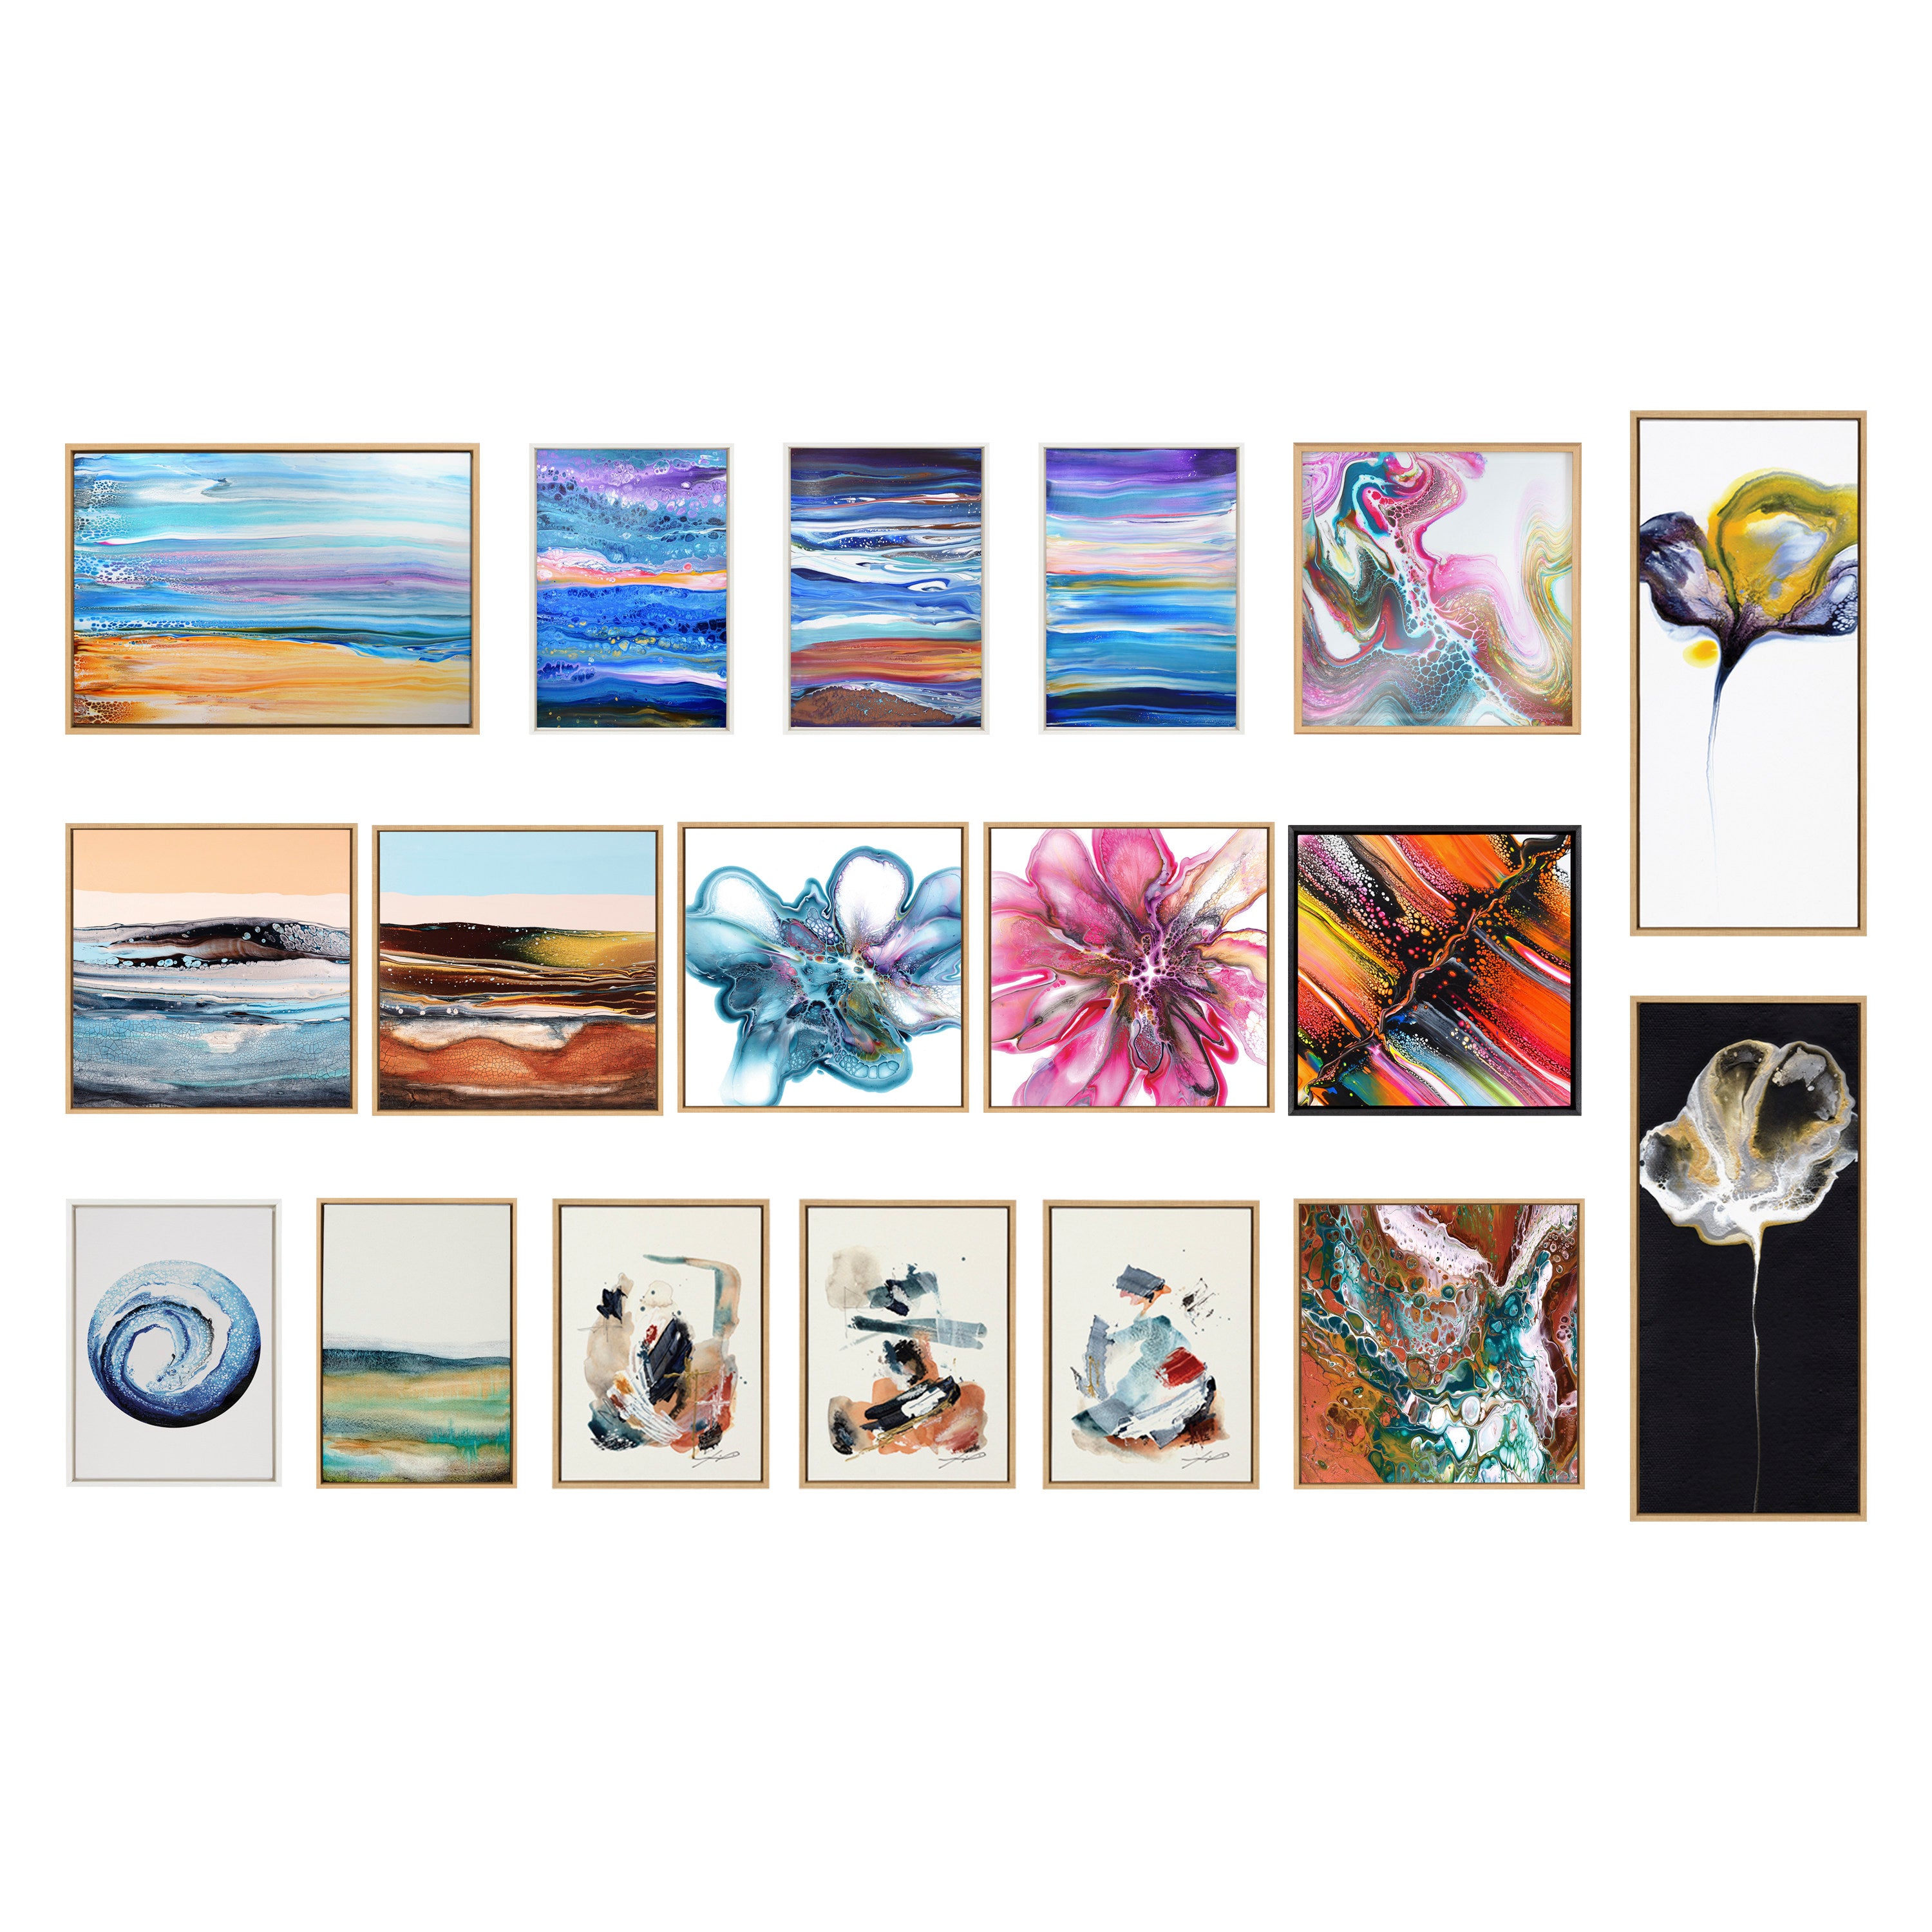 Sylvie Sand and Surf Framed Canvas by Xizhou Xie